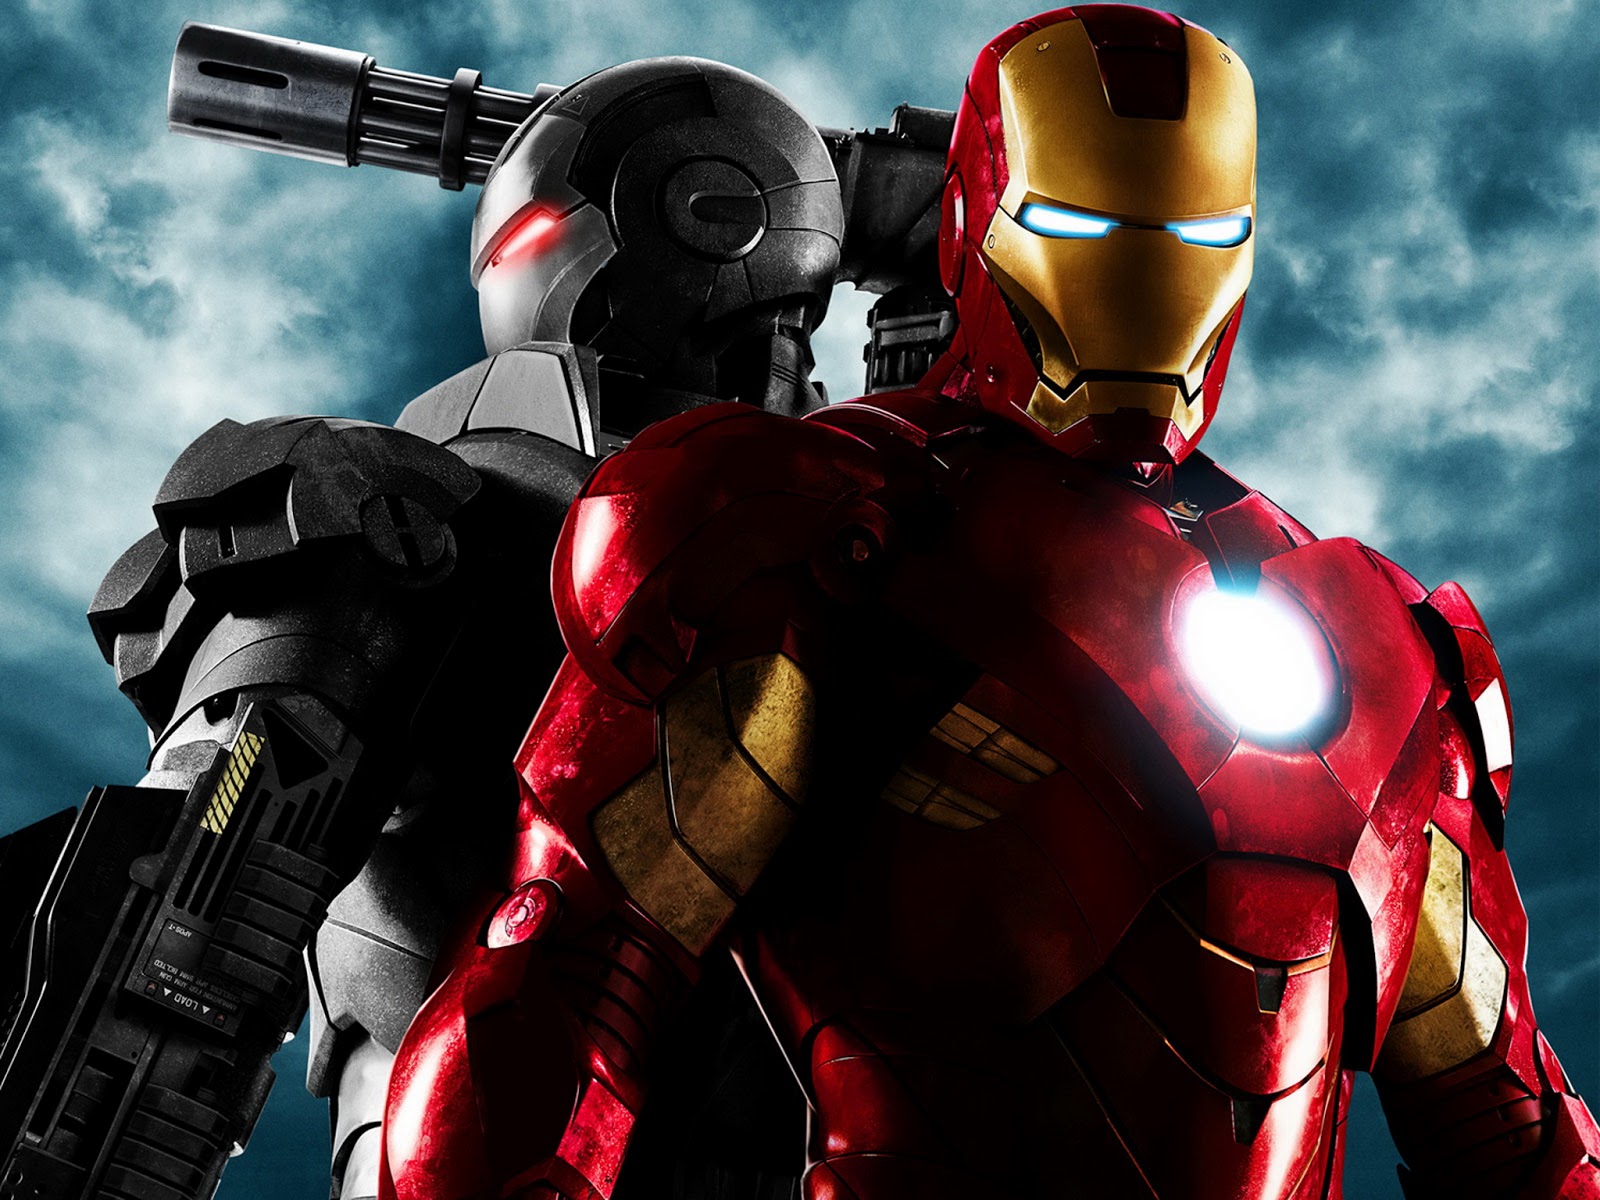 Free HD Wallpapers: Iron Man 3 Movie Free HD Wallpapers 2013